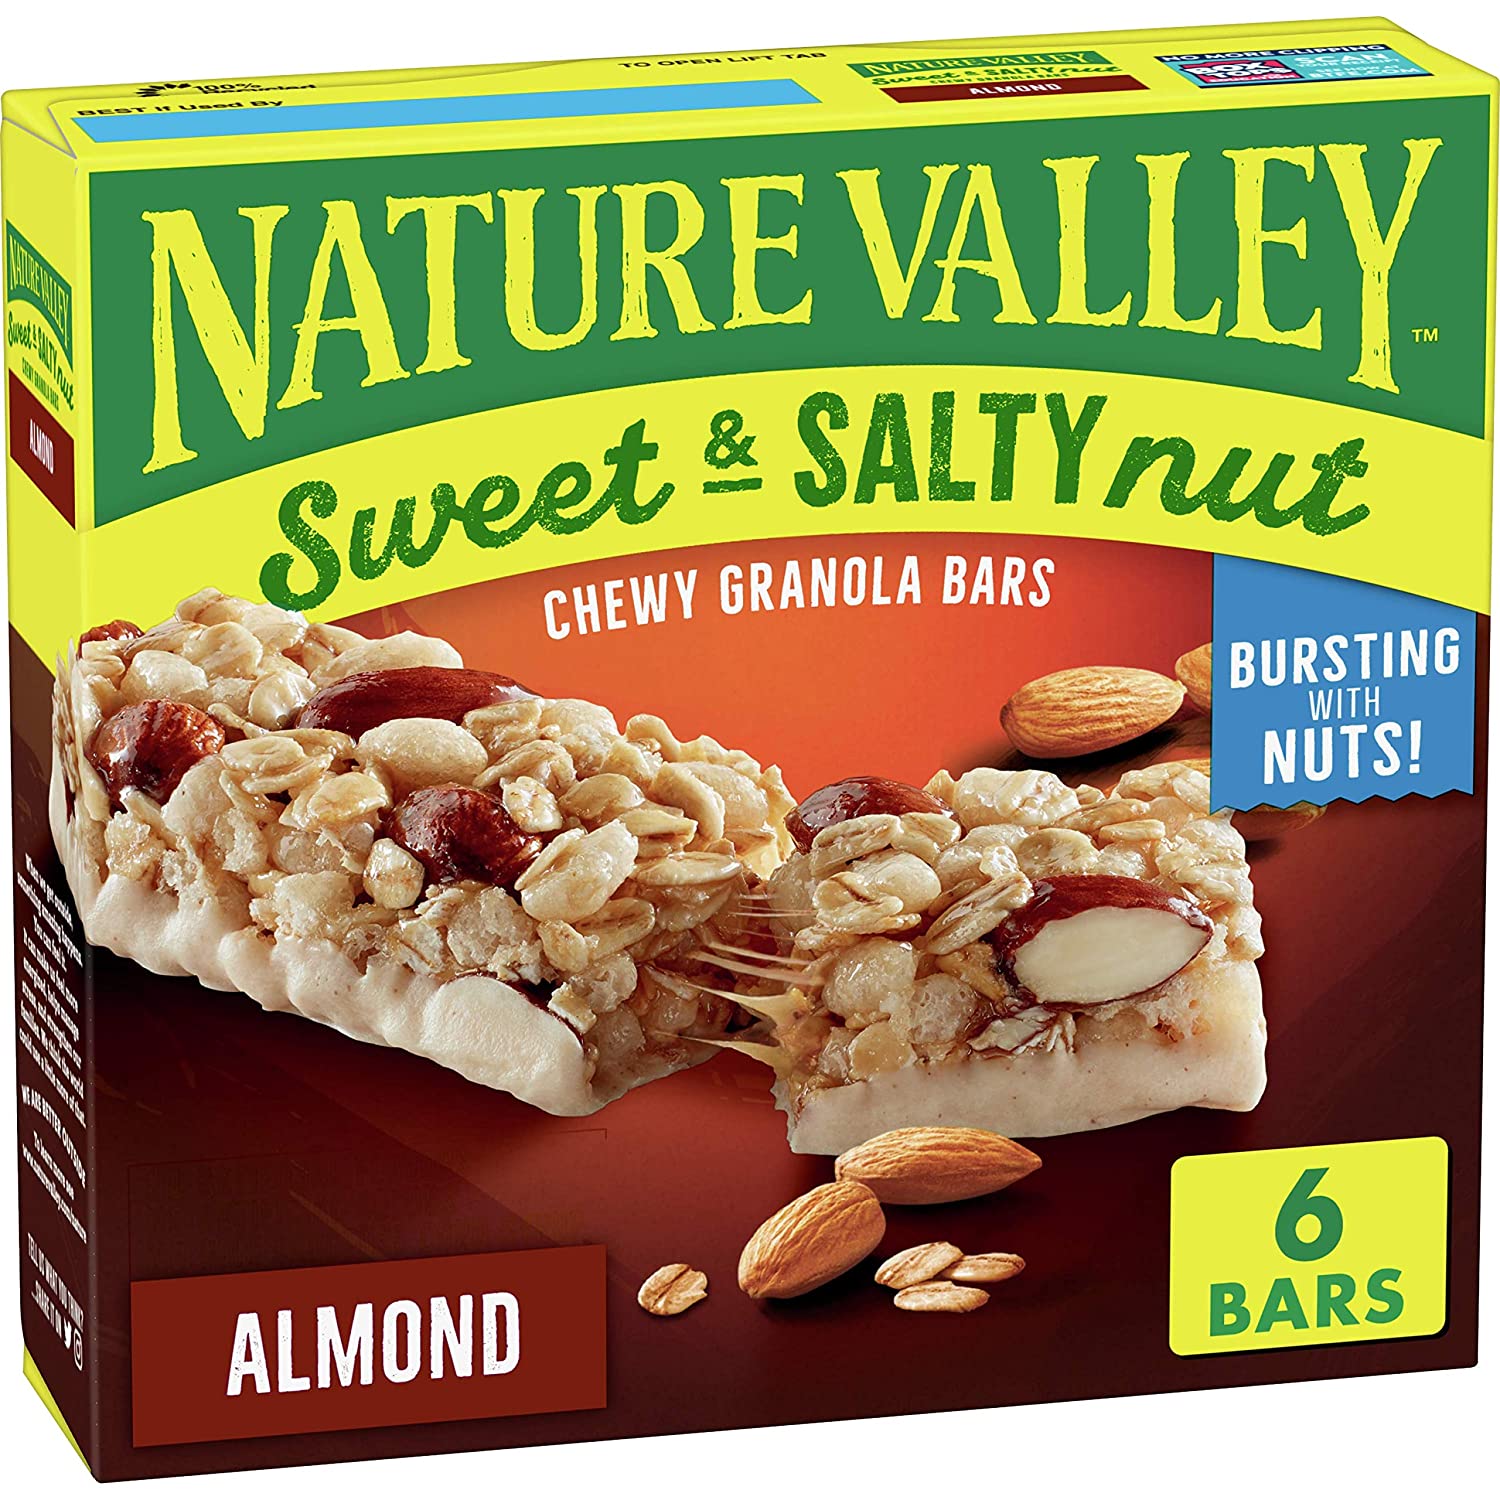 6-Count Nature Valley Granola Bars Sweet and Salty Nut (Almond) $1.46 AC + Free Prime Shipping